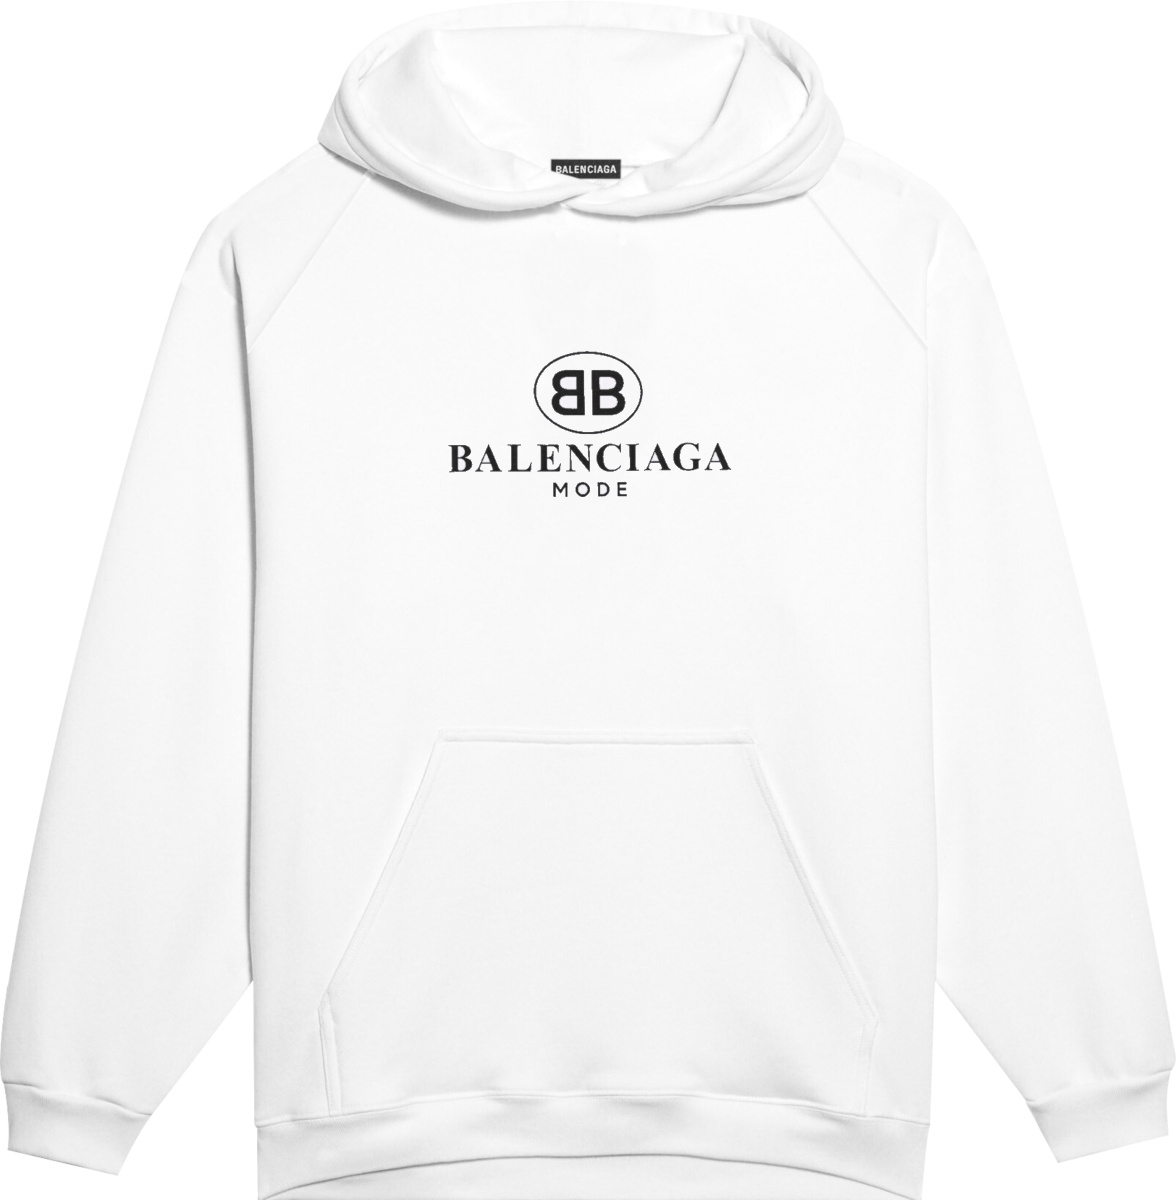 Balenciaga White 'BB Mode' Hoodie | Incorporated Style